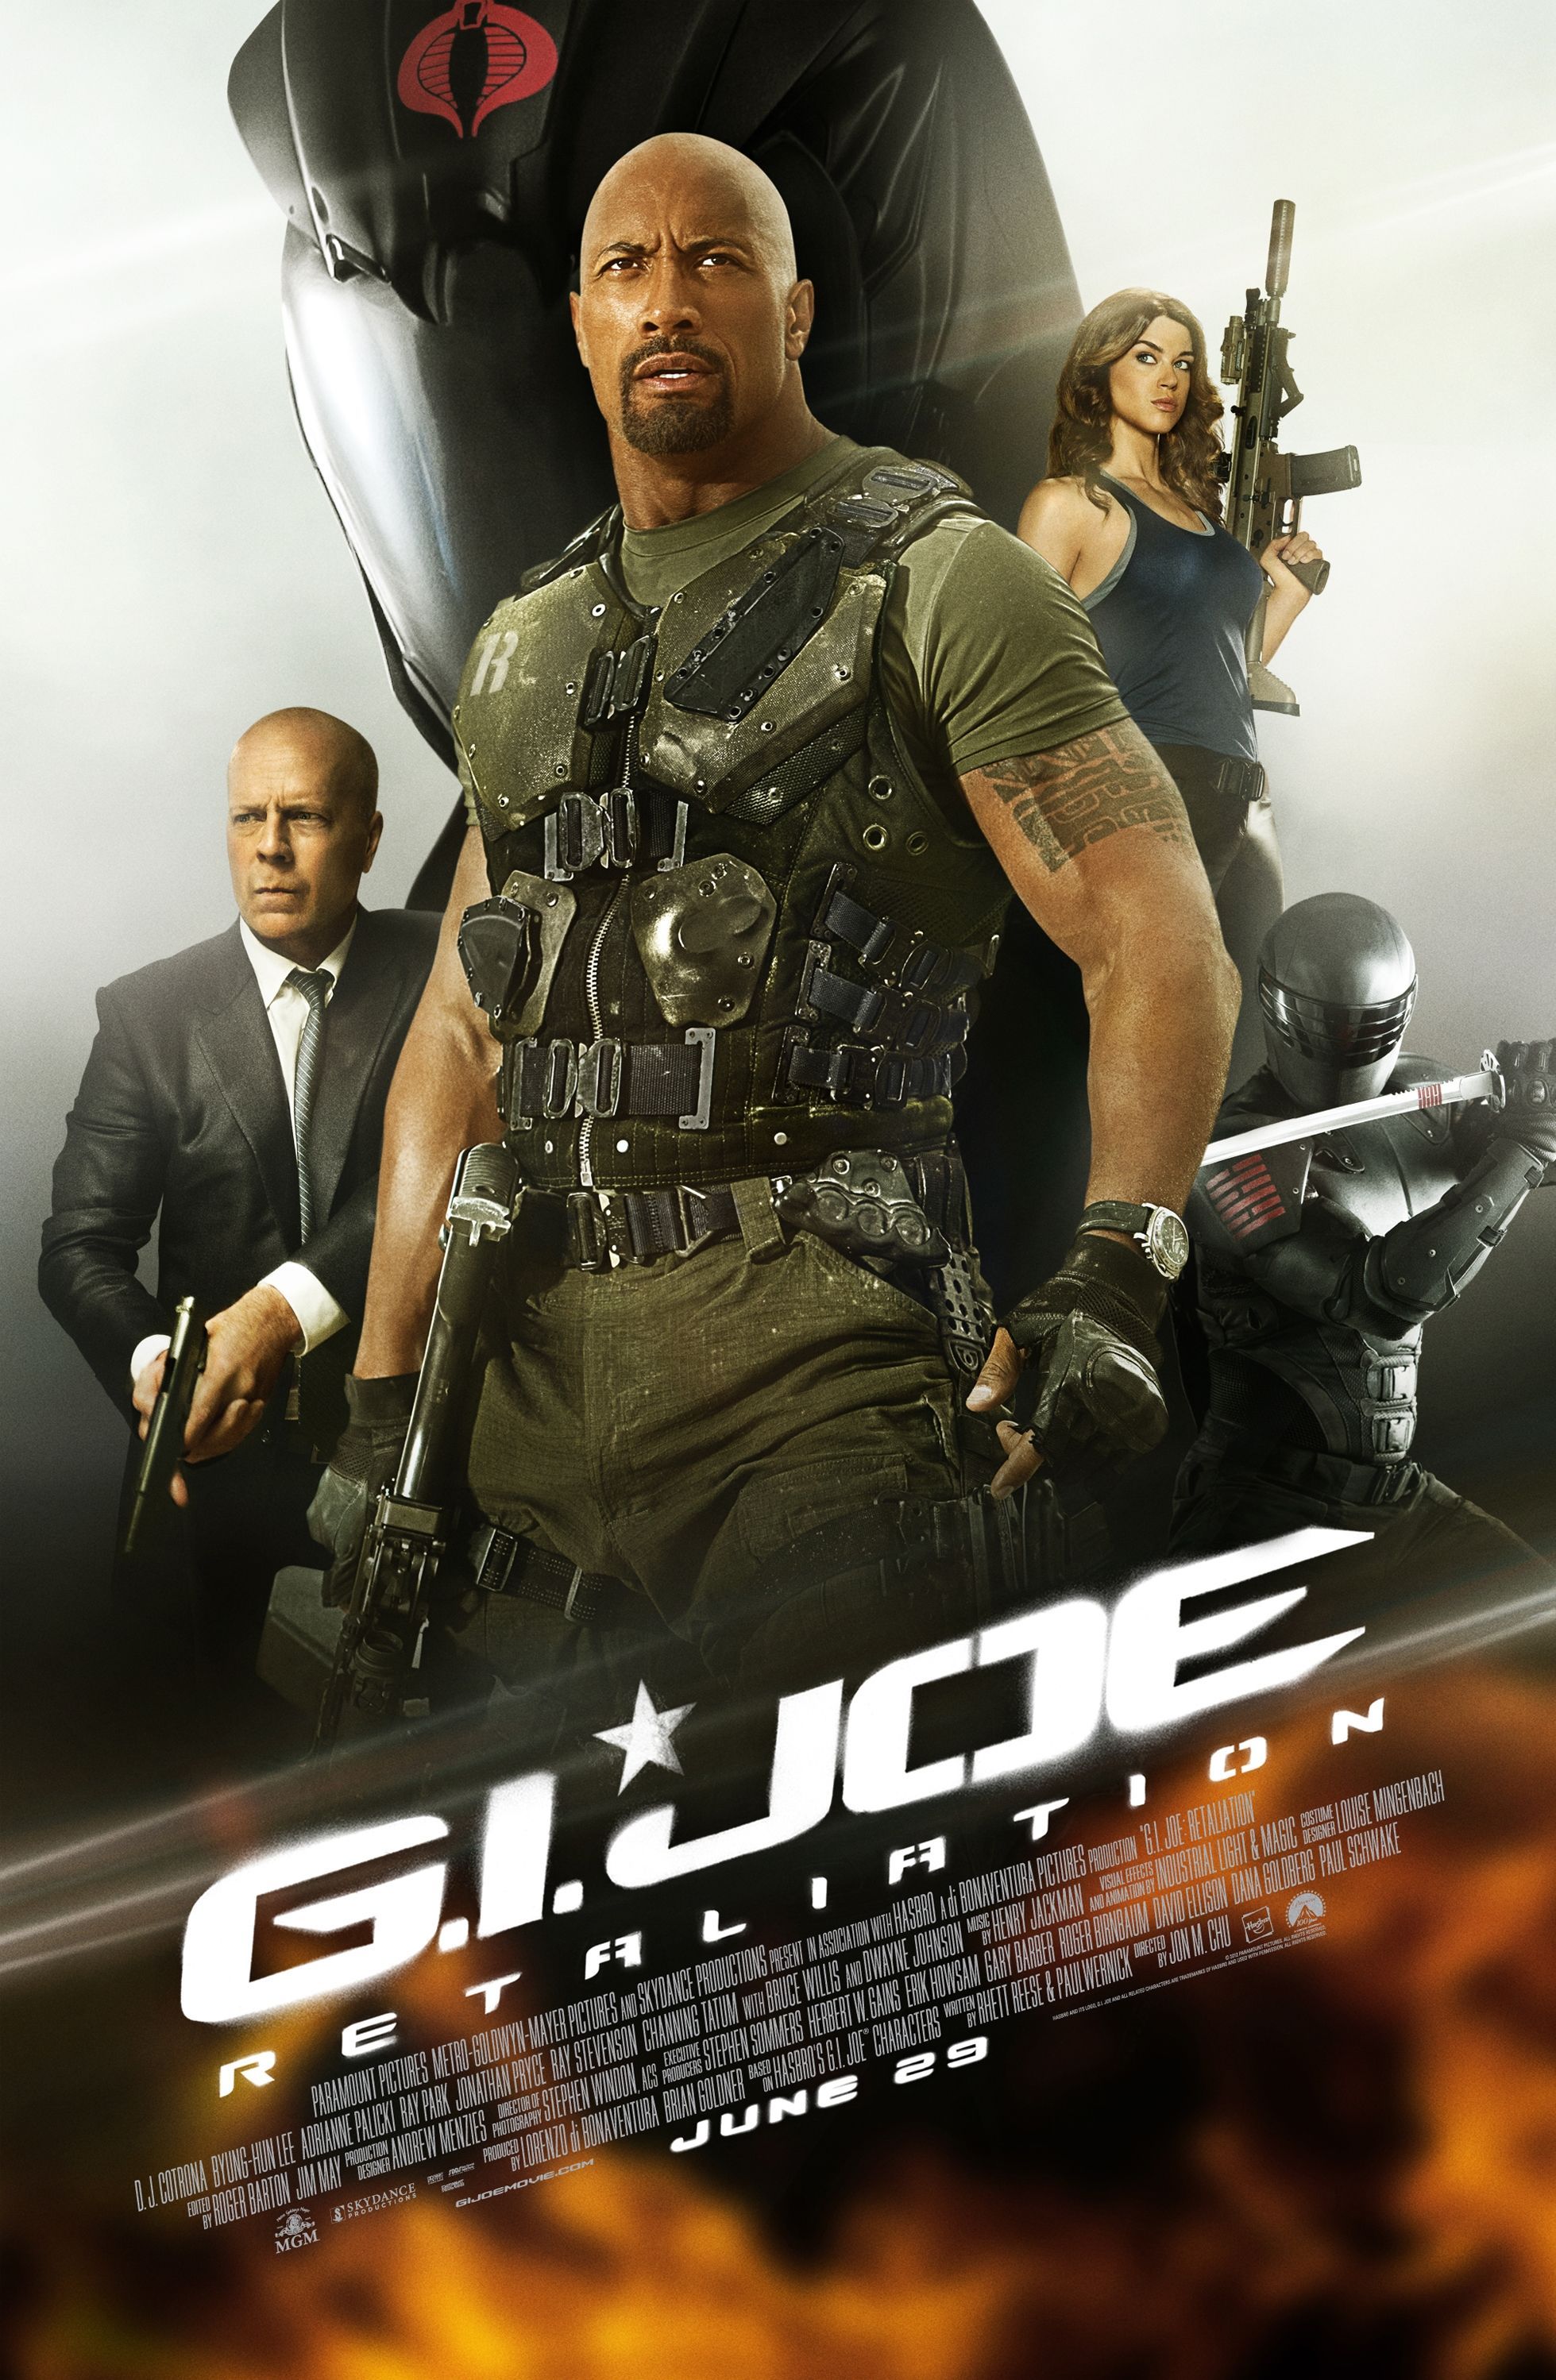 Four New Videos From G.I. Joe: Retaliation Show Tons Of Action. Joe movie, Love movie, Movie posters